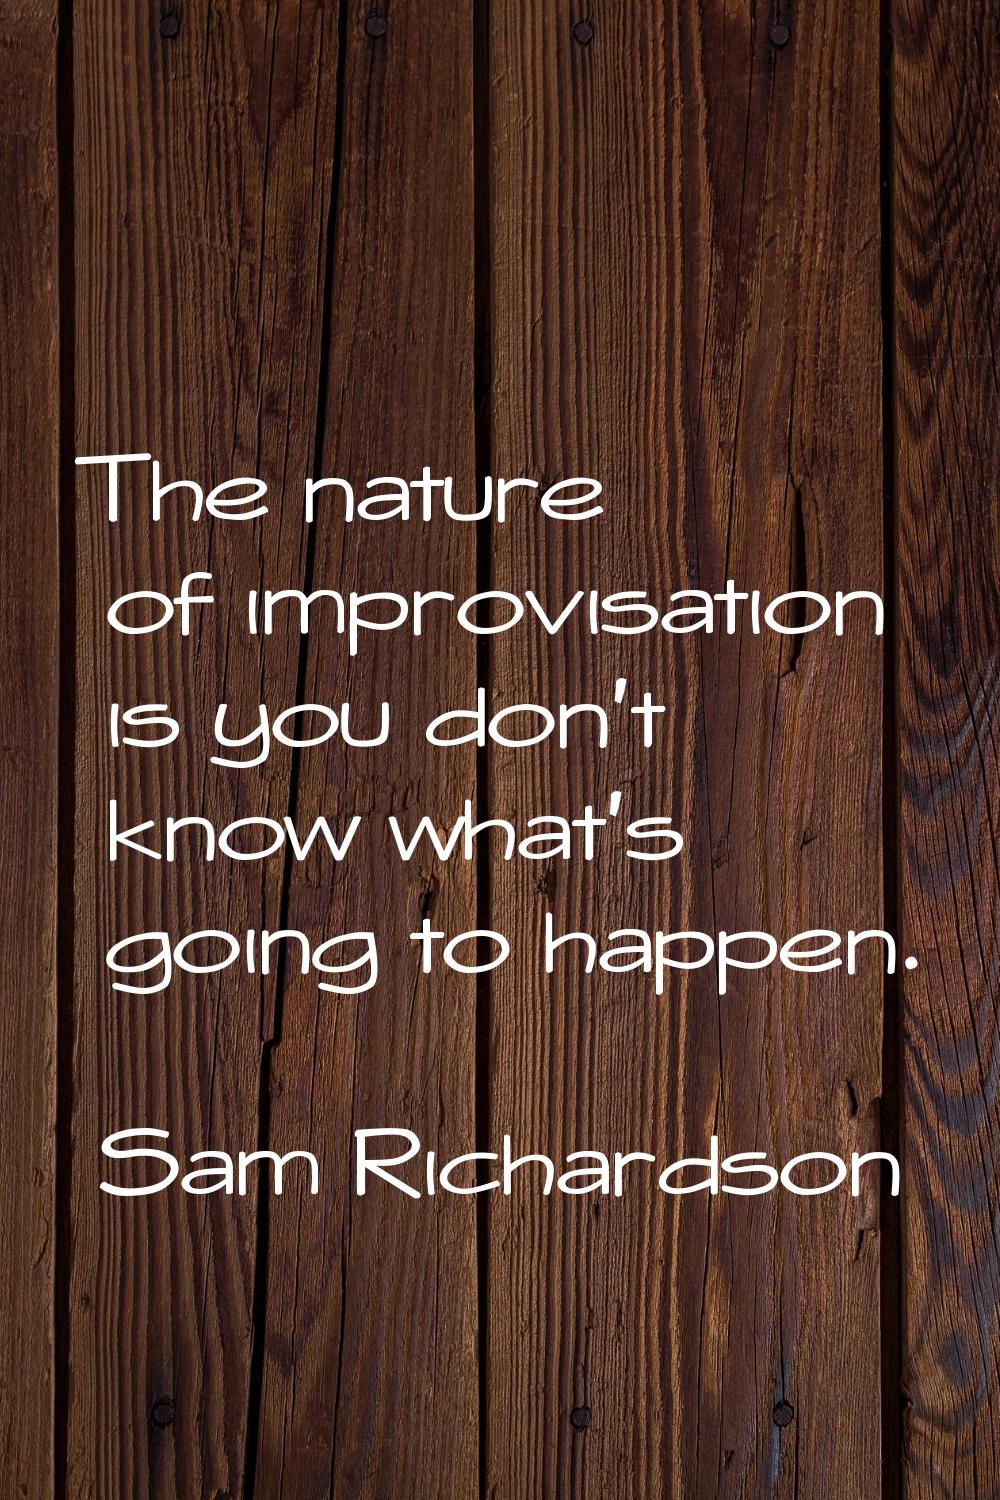 The nature of improvisation is you don't know what's going to happen.